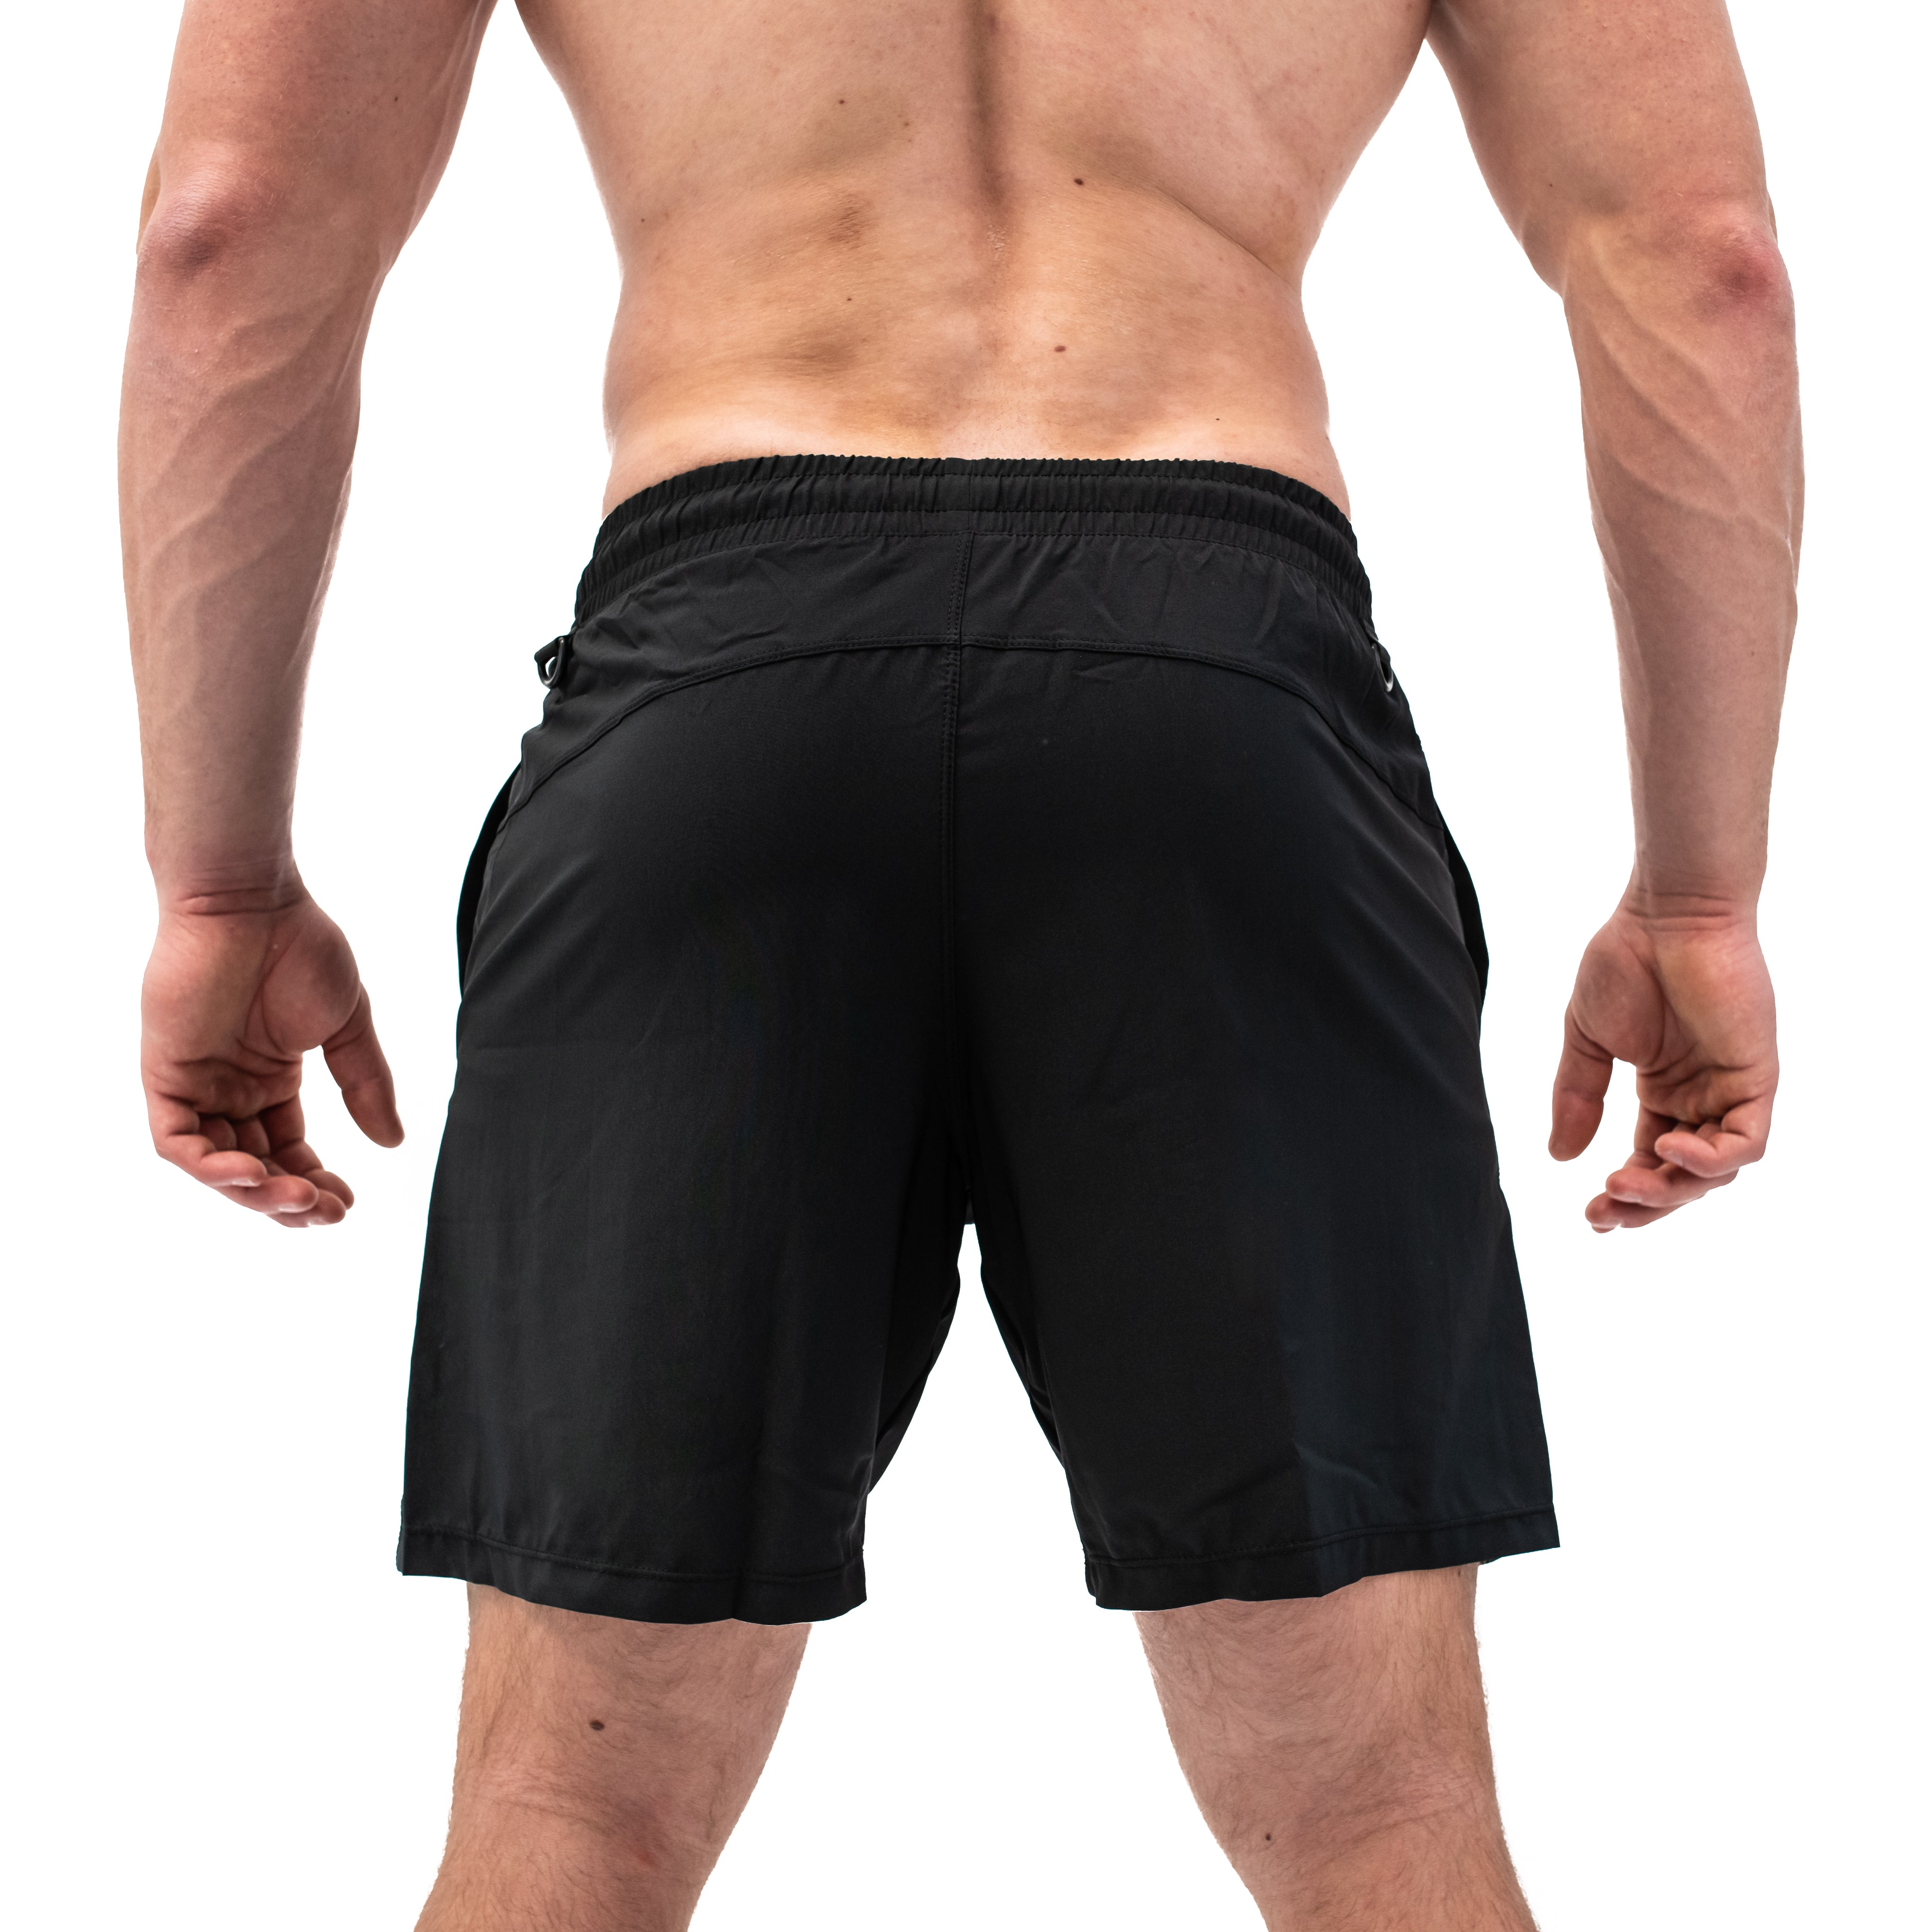 Have you ever squatted in shorts and realised that they may be too tight on you at the bottom of a squat? We have solved this problem with A7 Centre-stretch Squat Shorts. The shorts are made with stretchy fabric in between legs so you are never constricted during your squat. KWD shorts have a shorter inseam and are designed to show off your quads (KWaDs). Available in UK and Europe including France, Italy, Germany, Sweden and Poland.